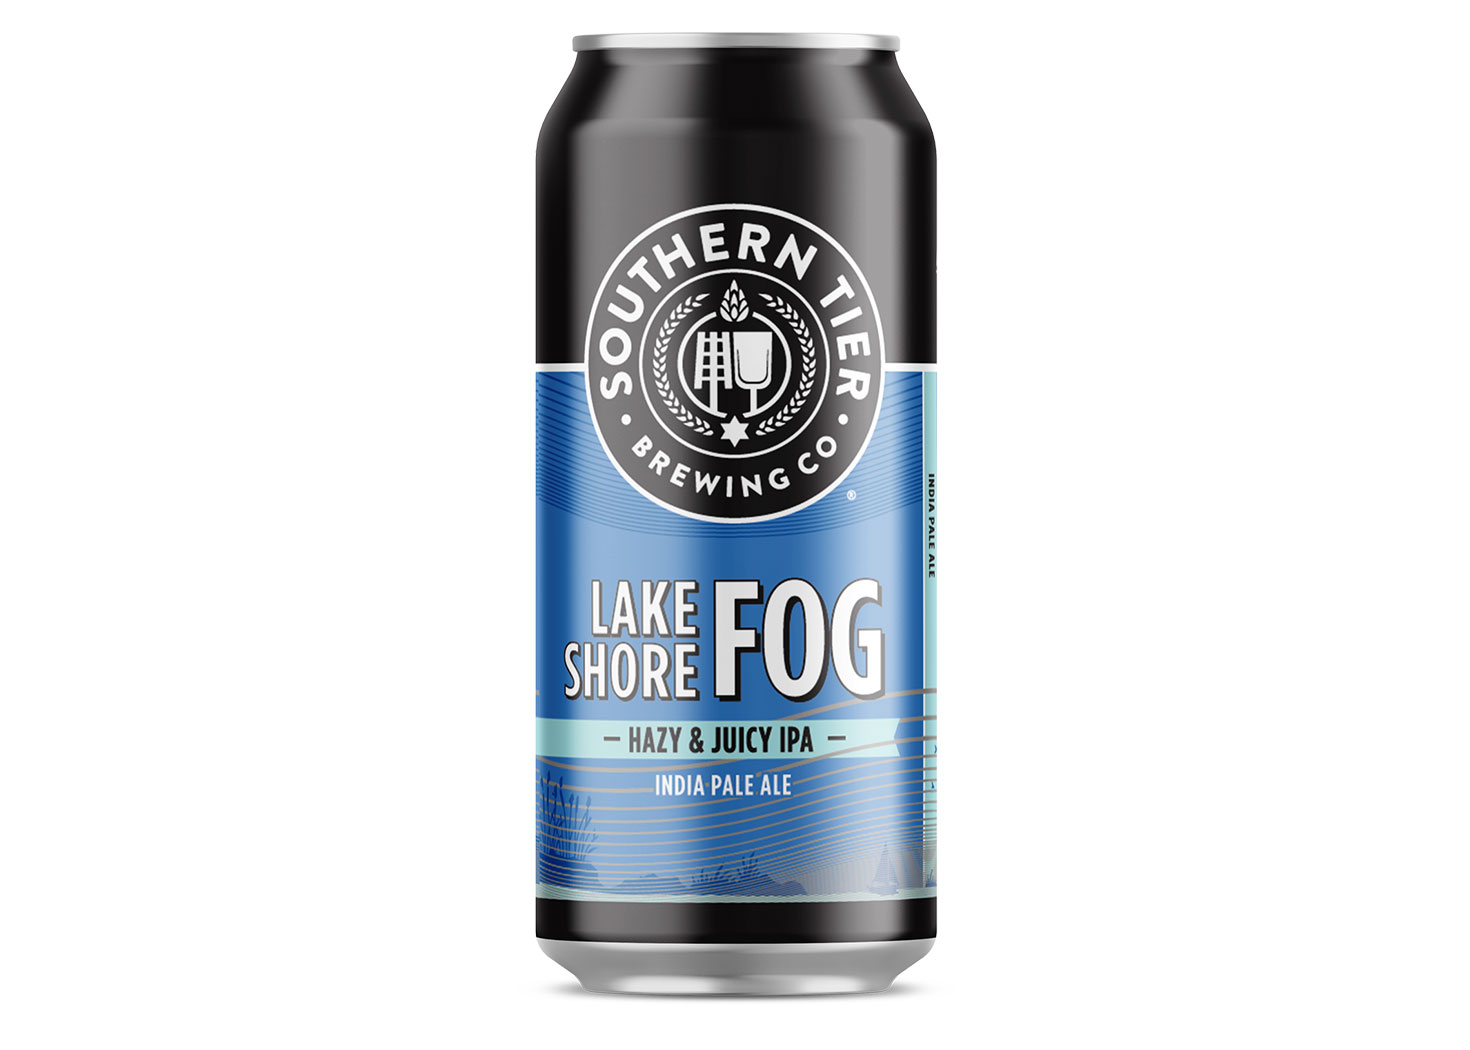 Southern Tier Lakeshore Fog